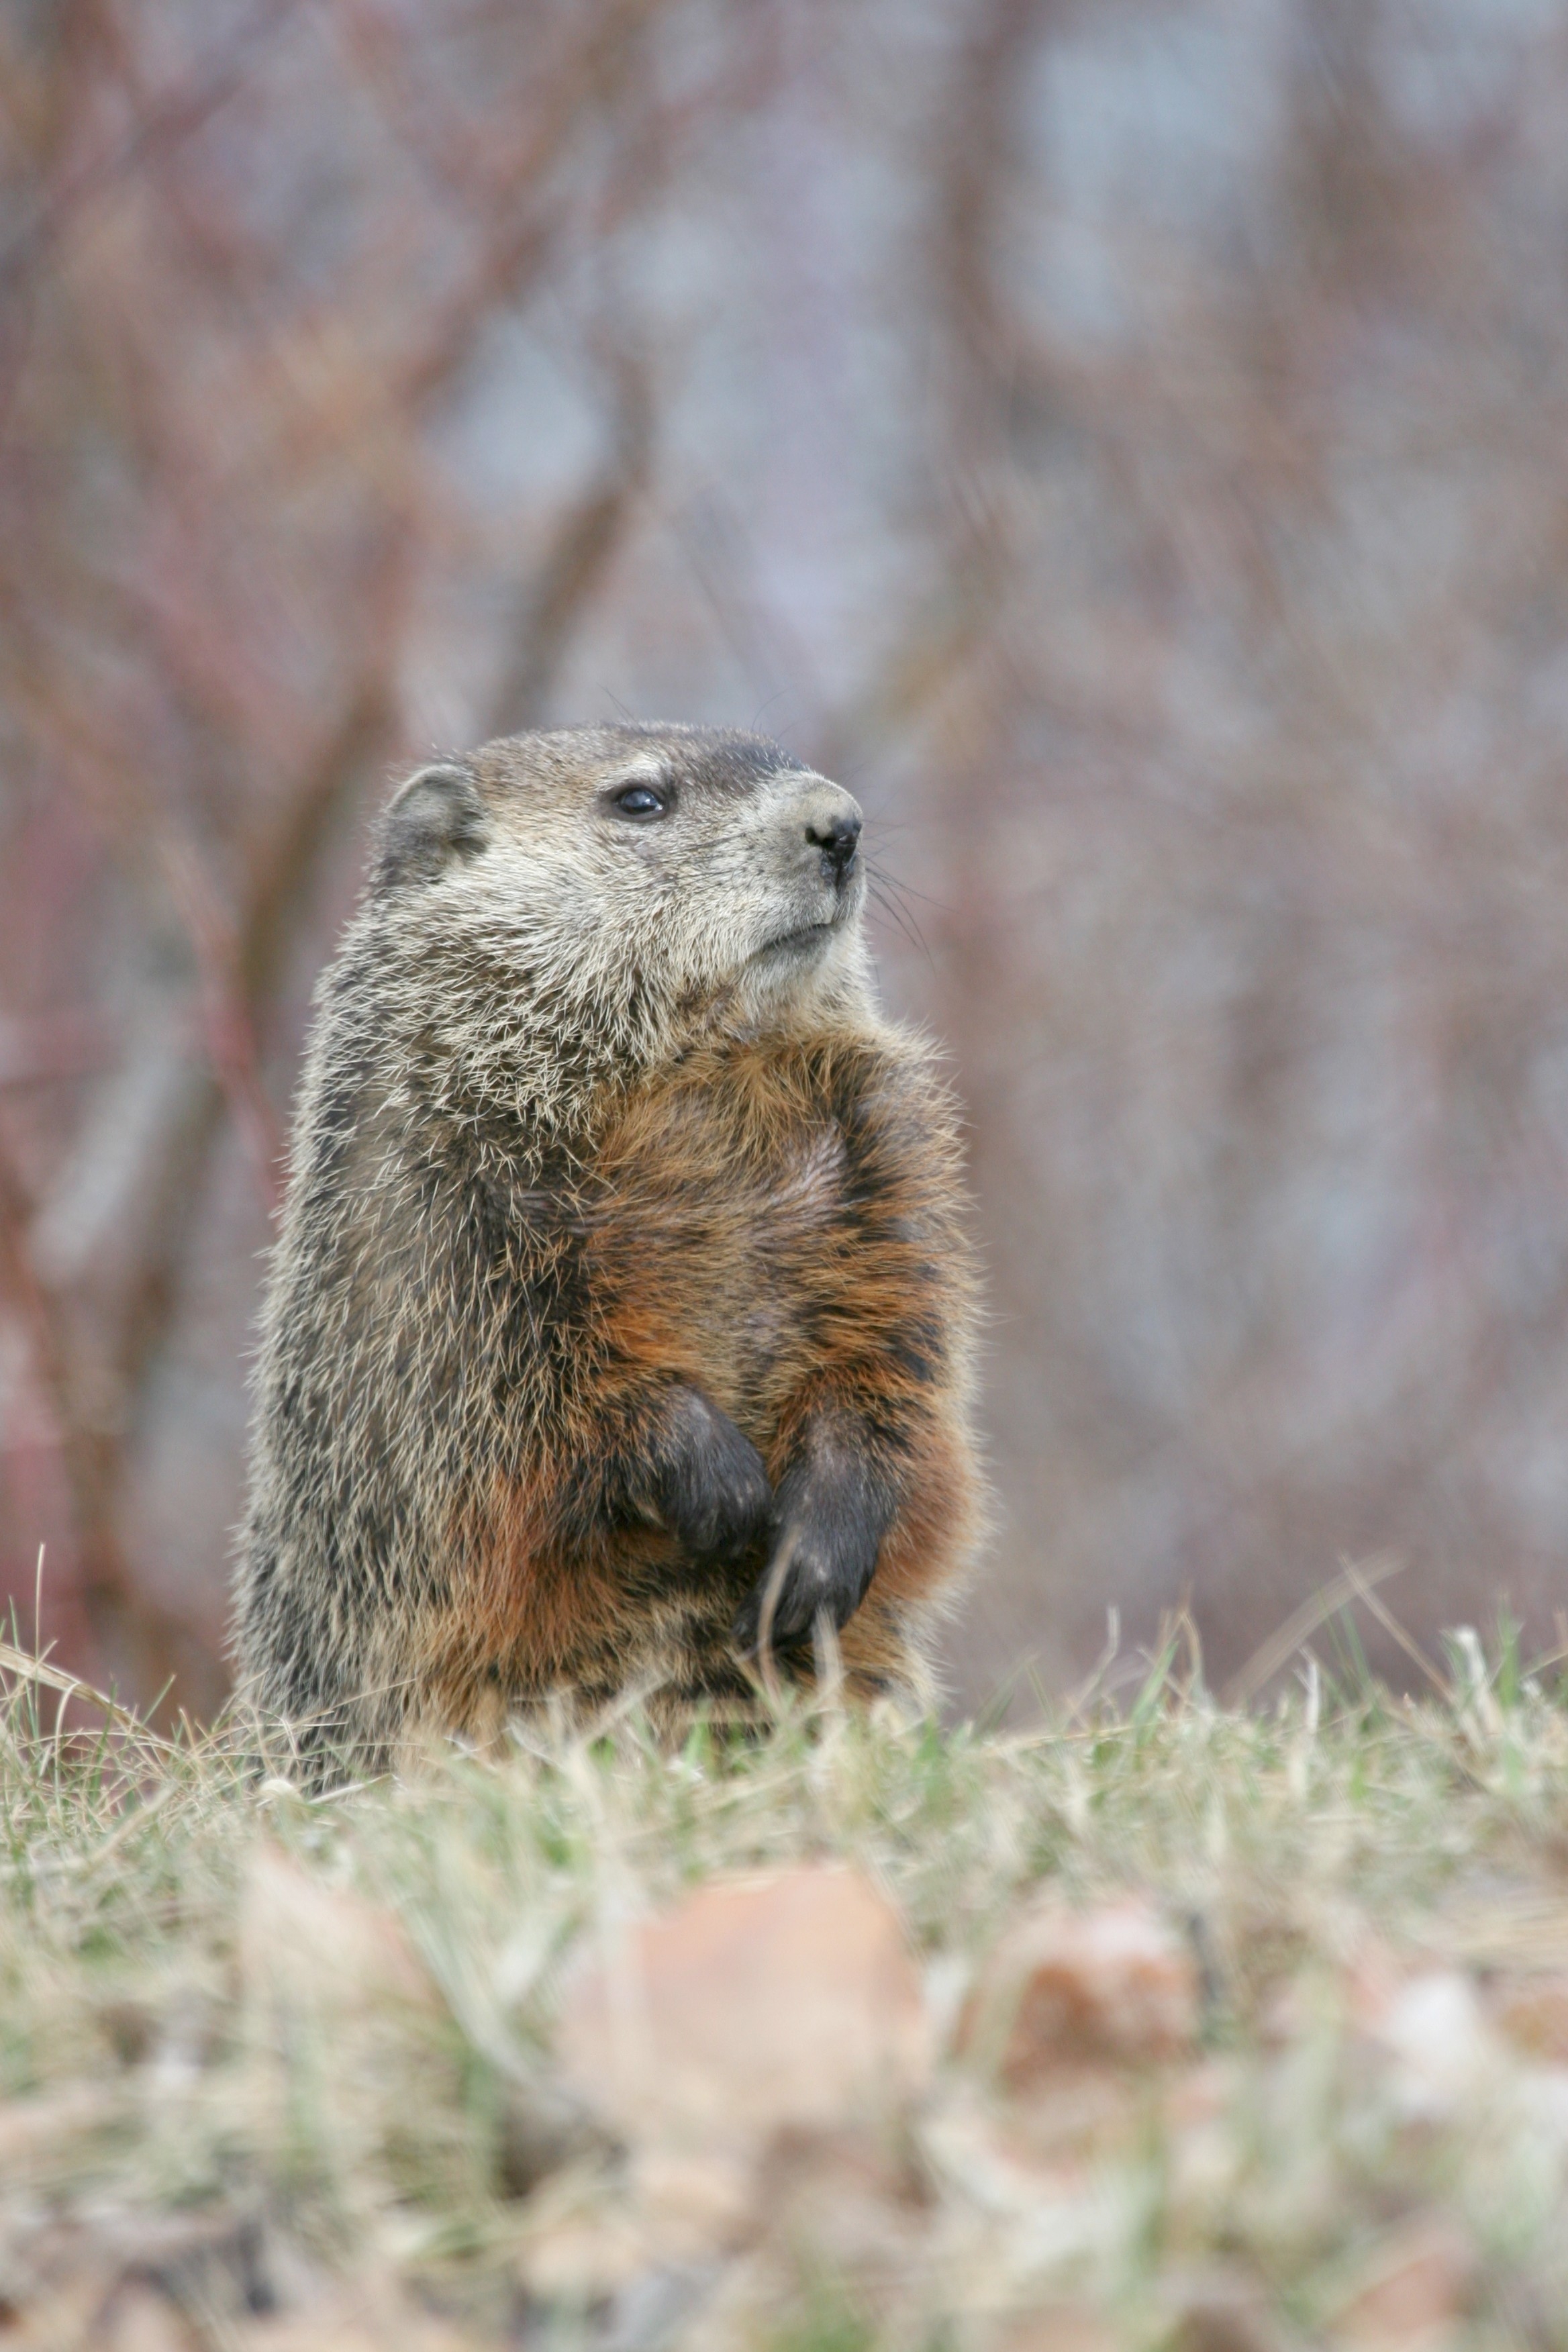 How to deal with problem Woodchuck in Vermont